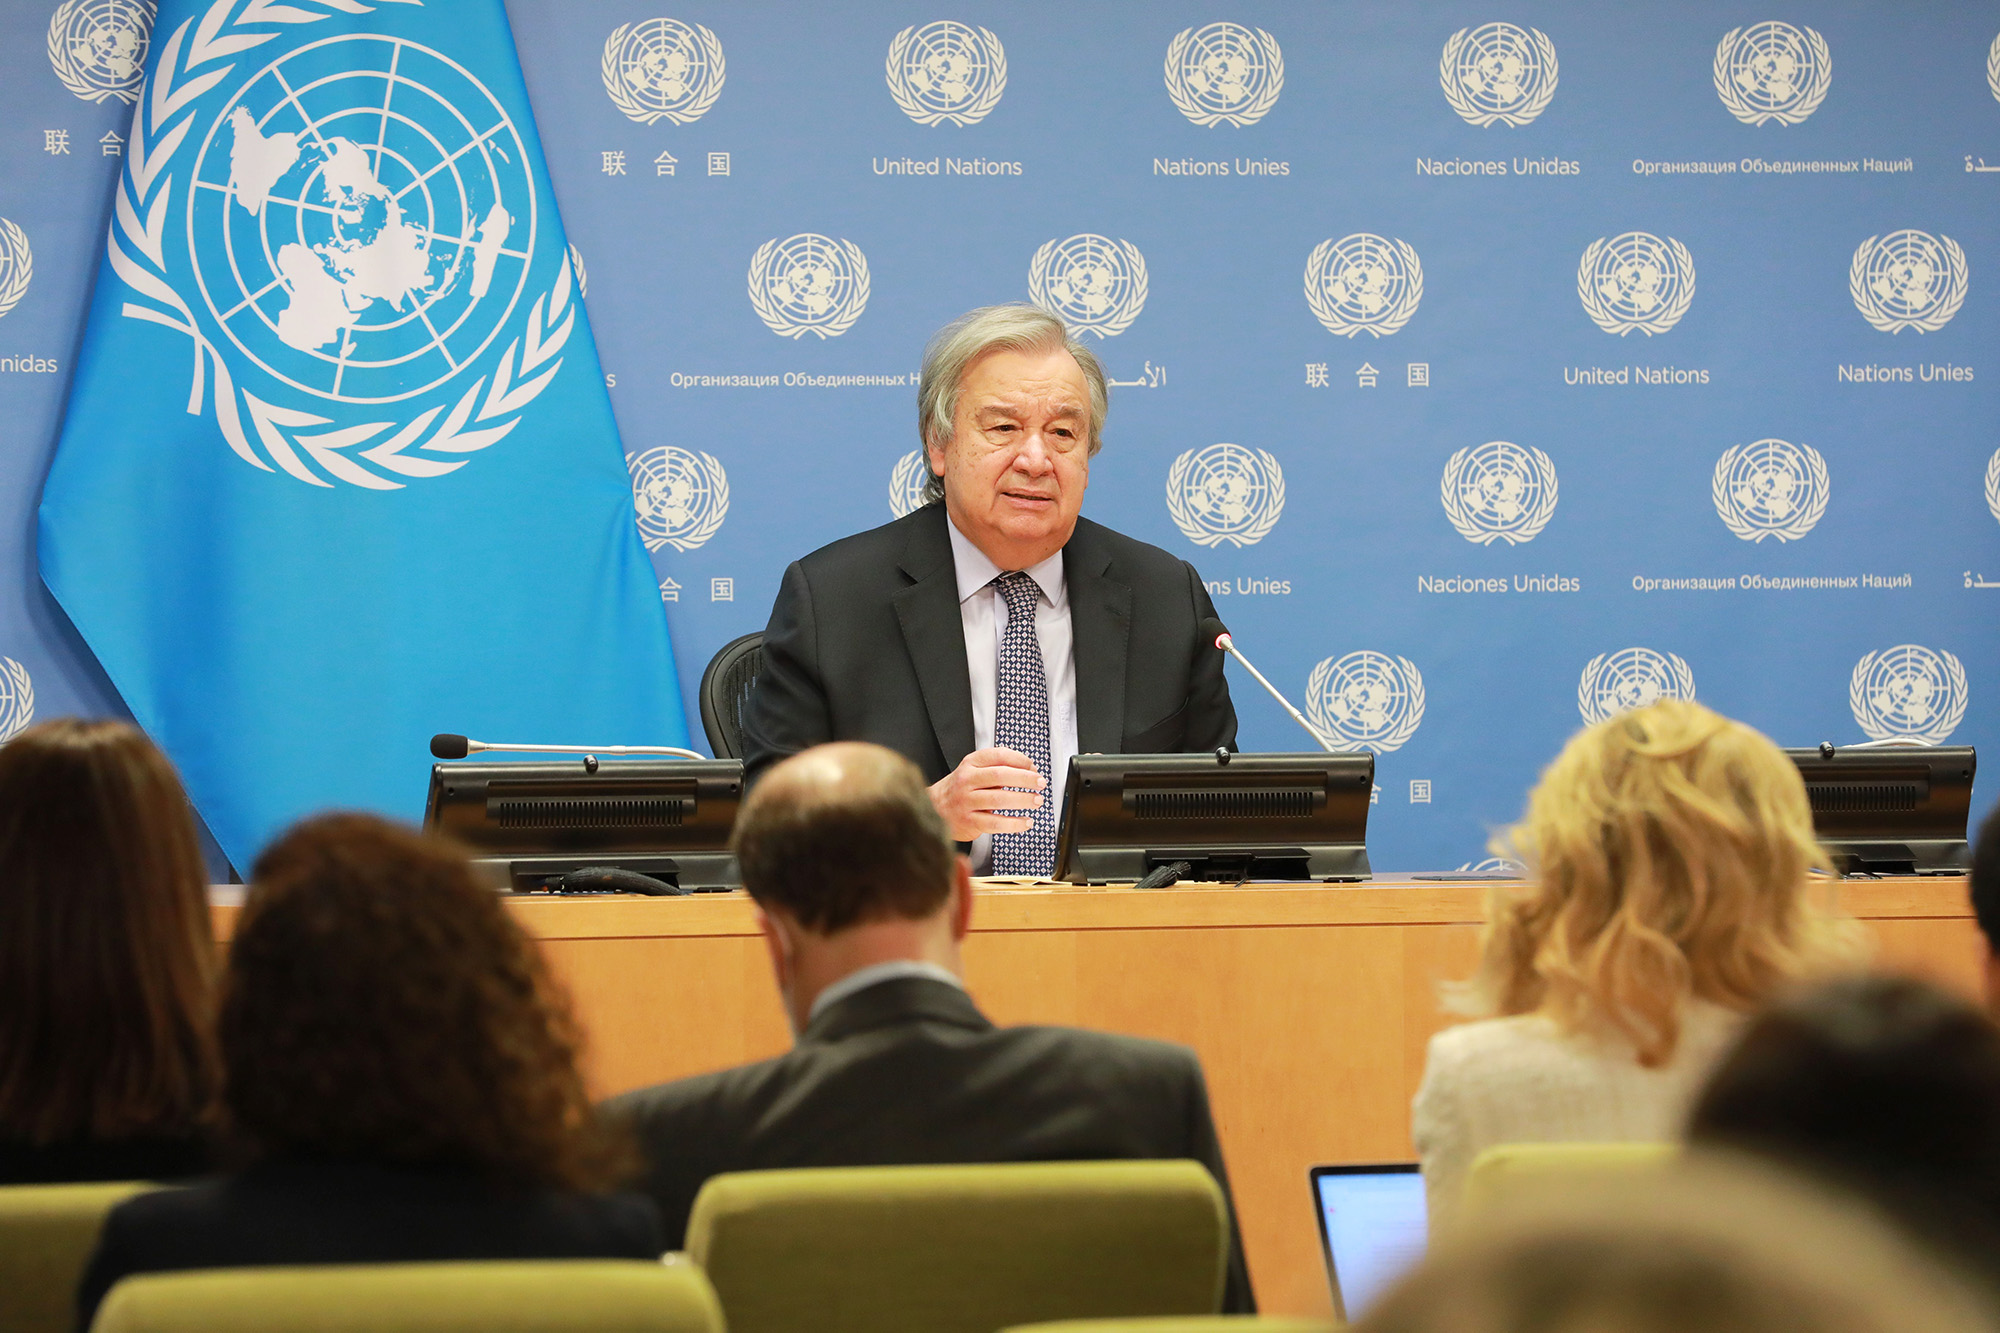 UN Secretary-General Antonio Guterres speaks at an end-of-year press conference at the UN headquarters in New York, on December 19.